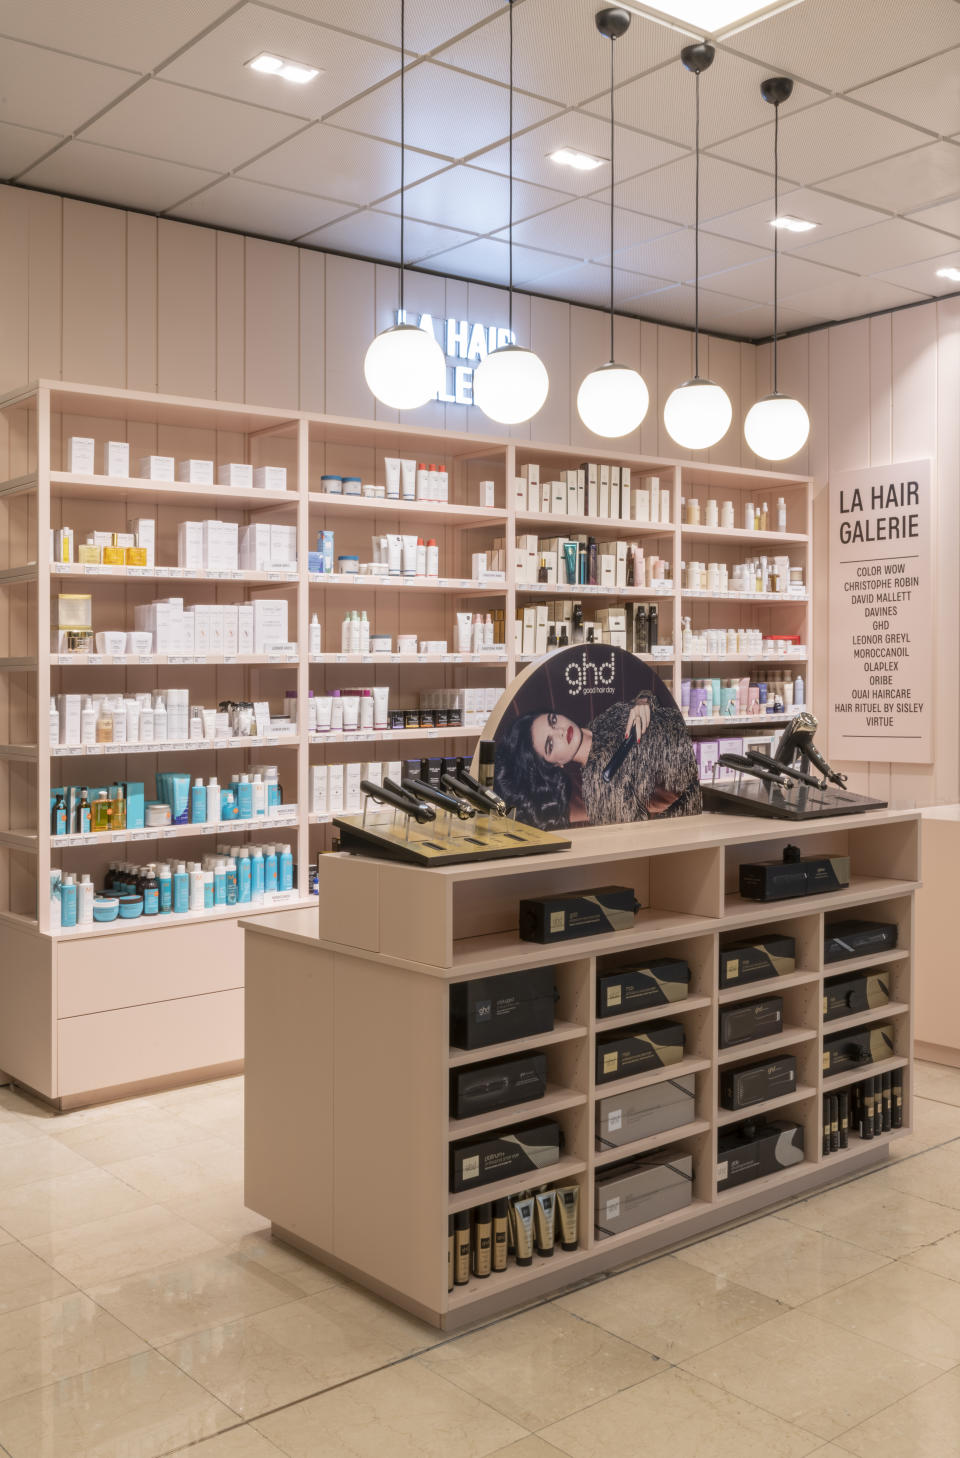 La Hair Galerie at Galeries Lafayette - Credit: Courtesy of Galeries Lafayette